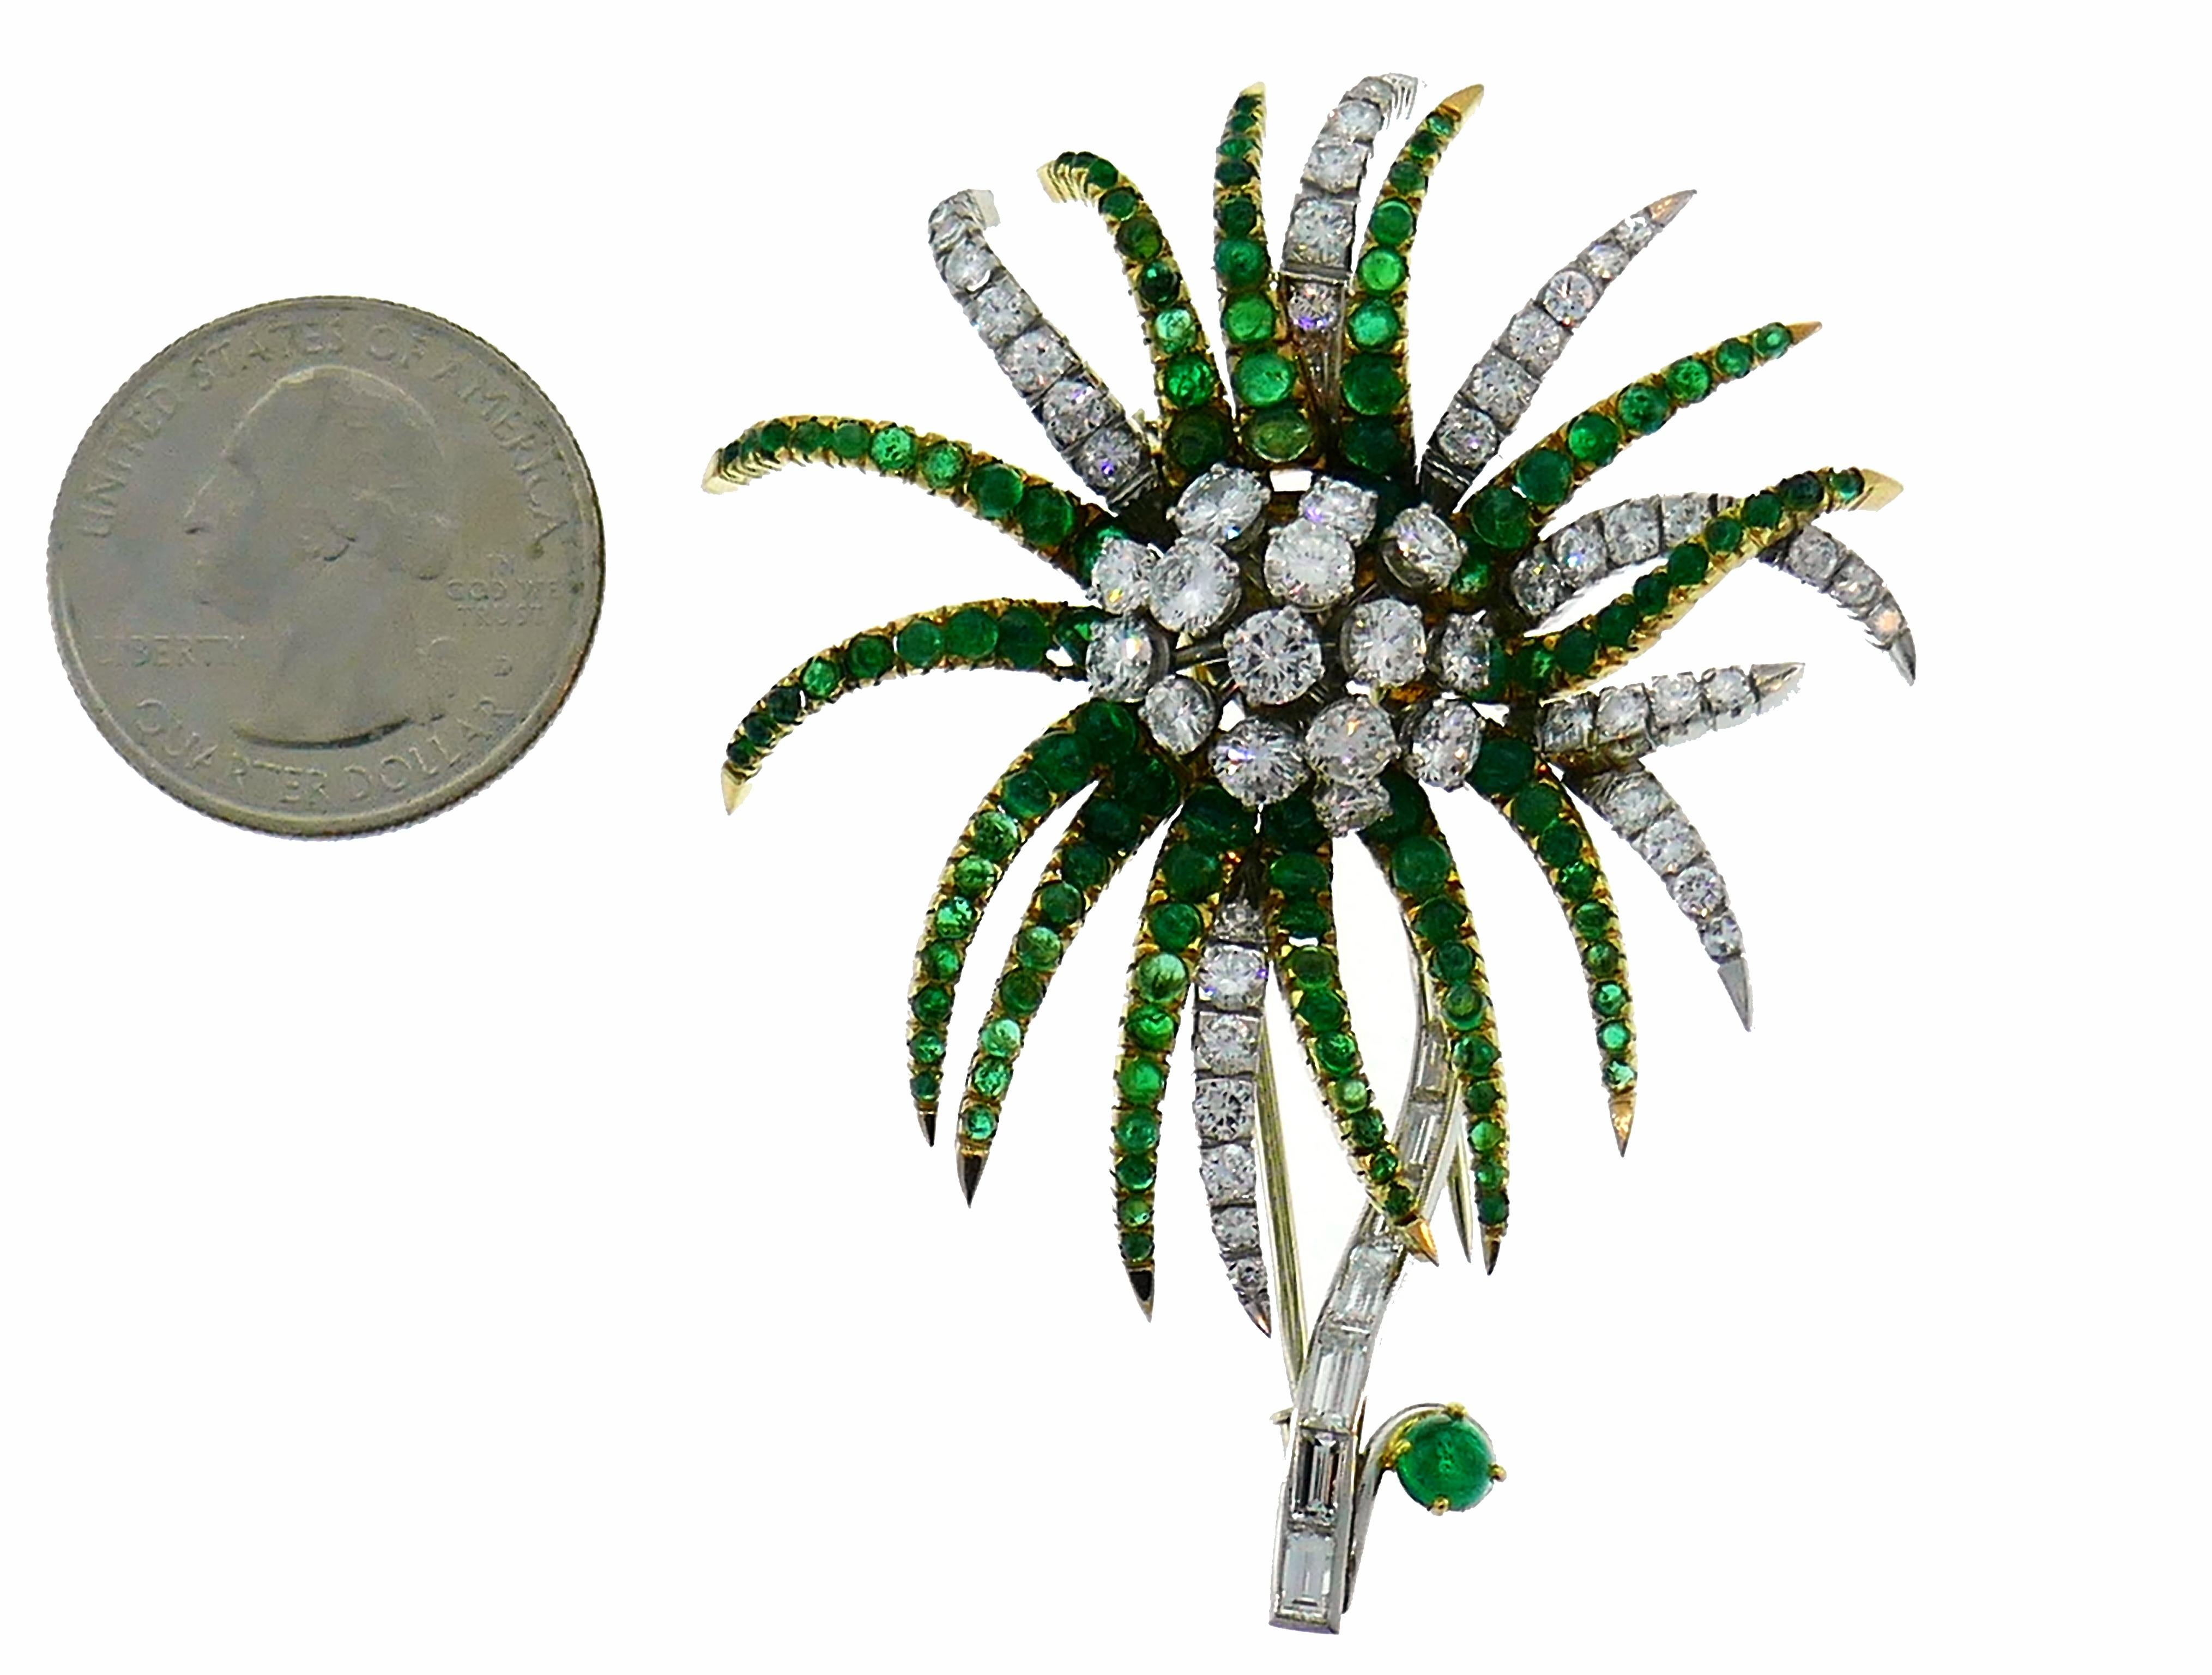 Lovely Chrizantema brooch created in France in the 1960s.
Made of 18 karat white gold and platinum, The clip is set with approximately 5 carats of round brilliant and baguette cut diamonds and 2.80 carats of round cabochon emeralds.
Weight 31.3